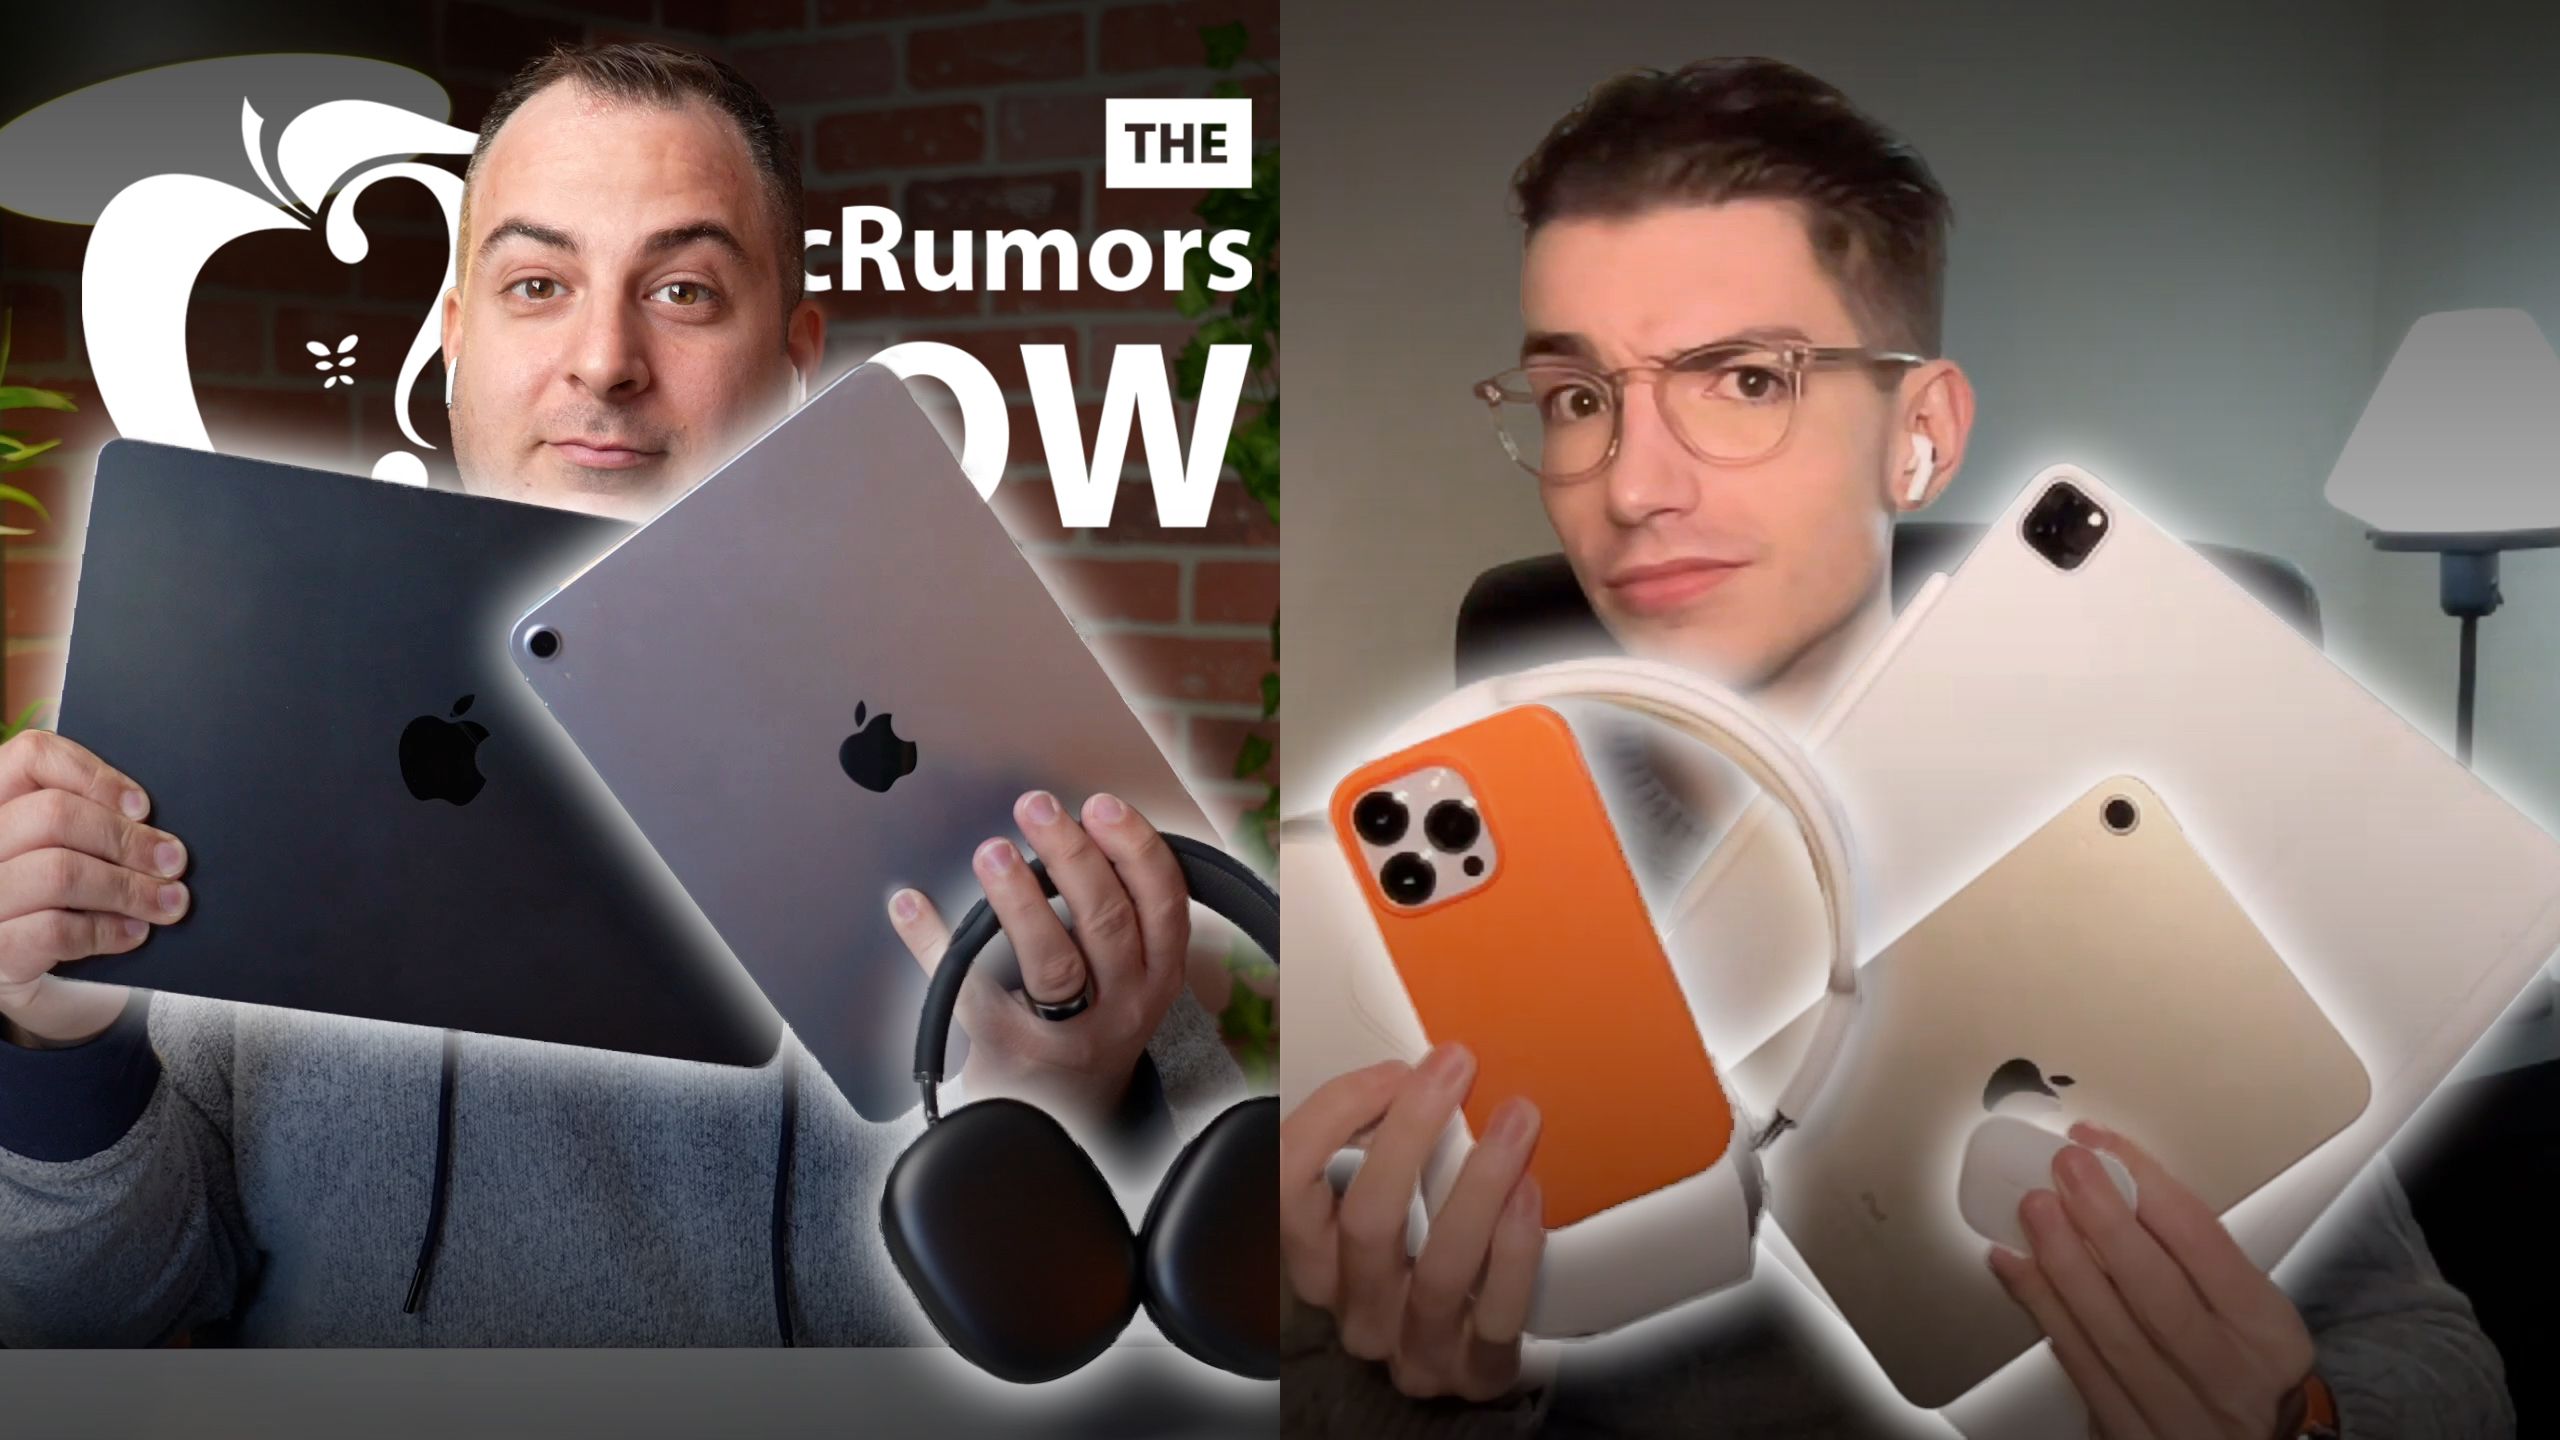 The MacRumors Show: How We Use Our Apple Devices